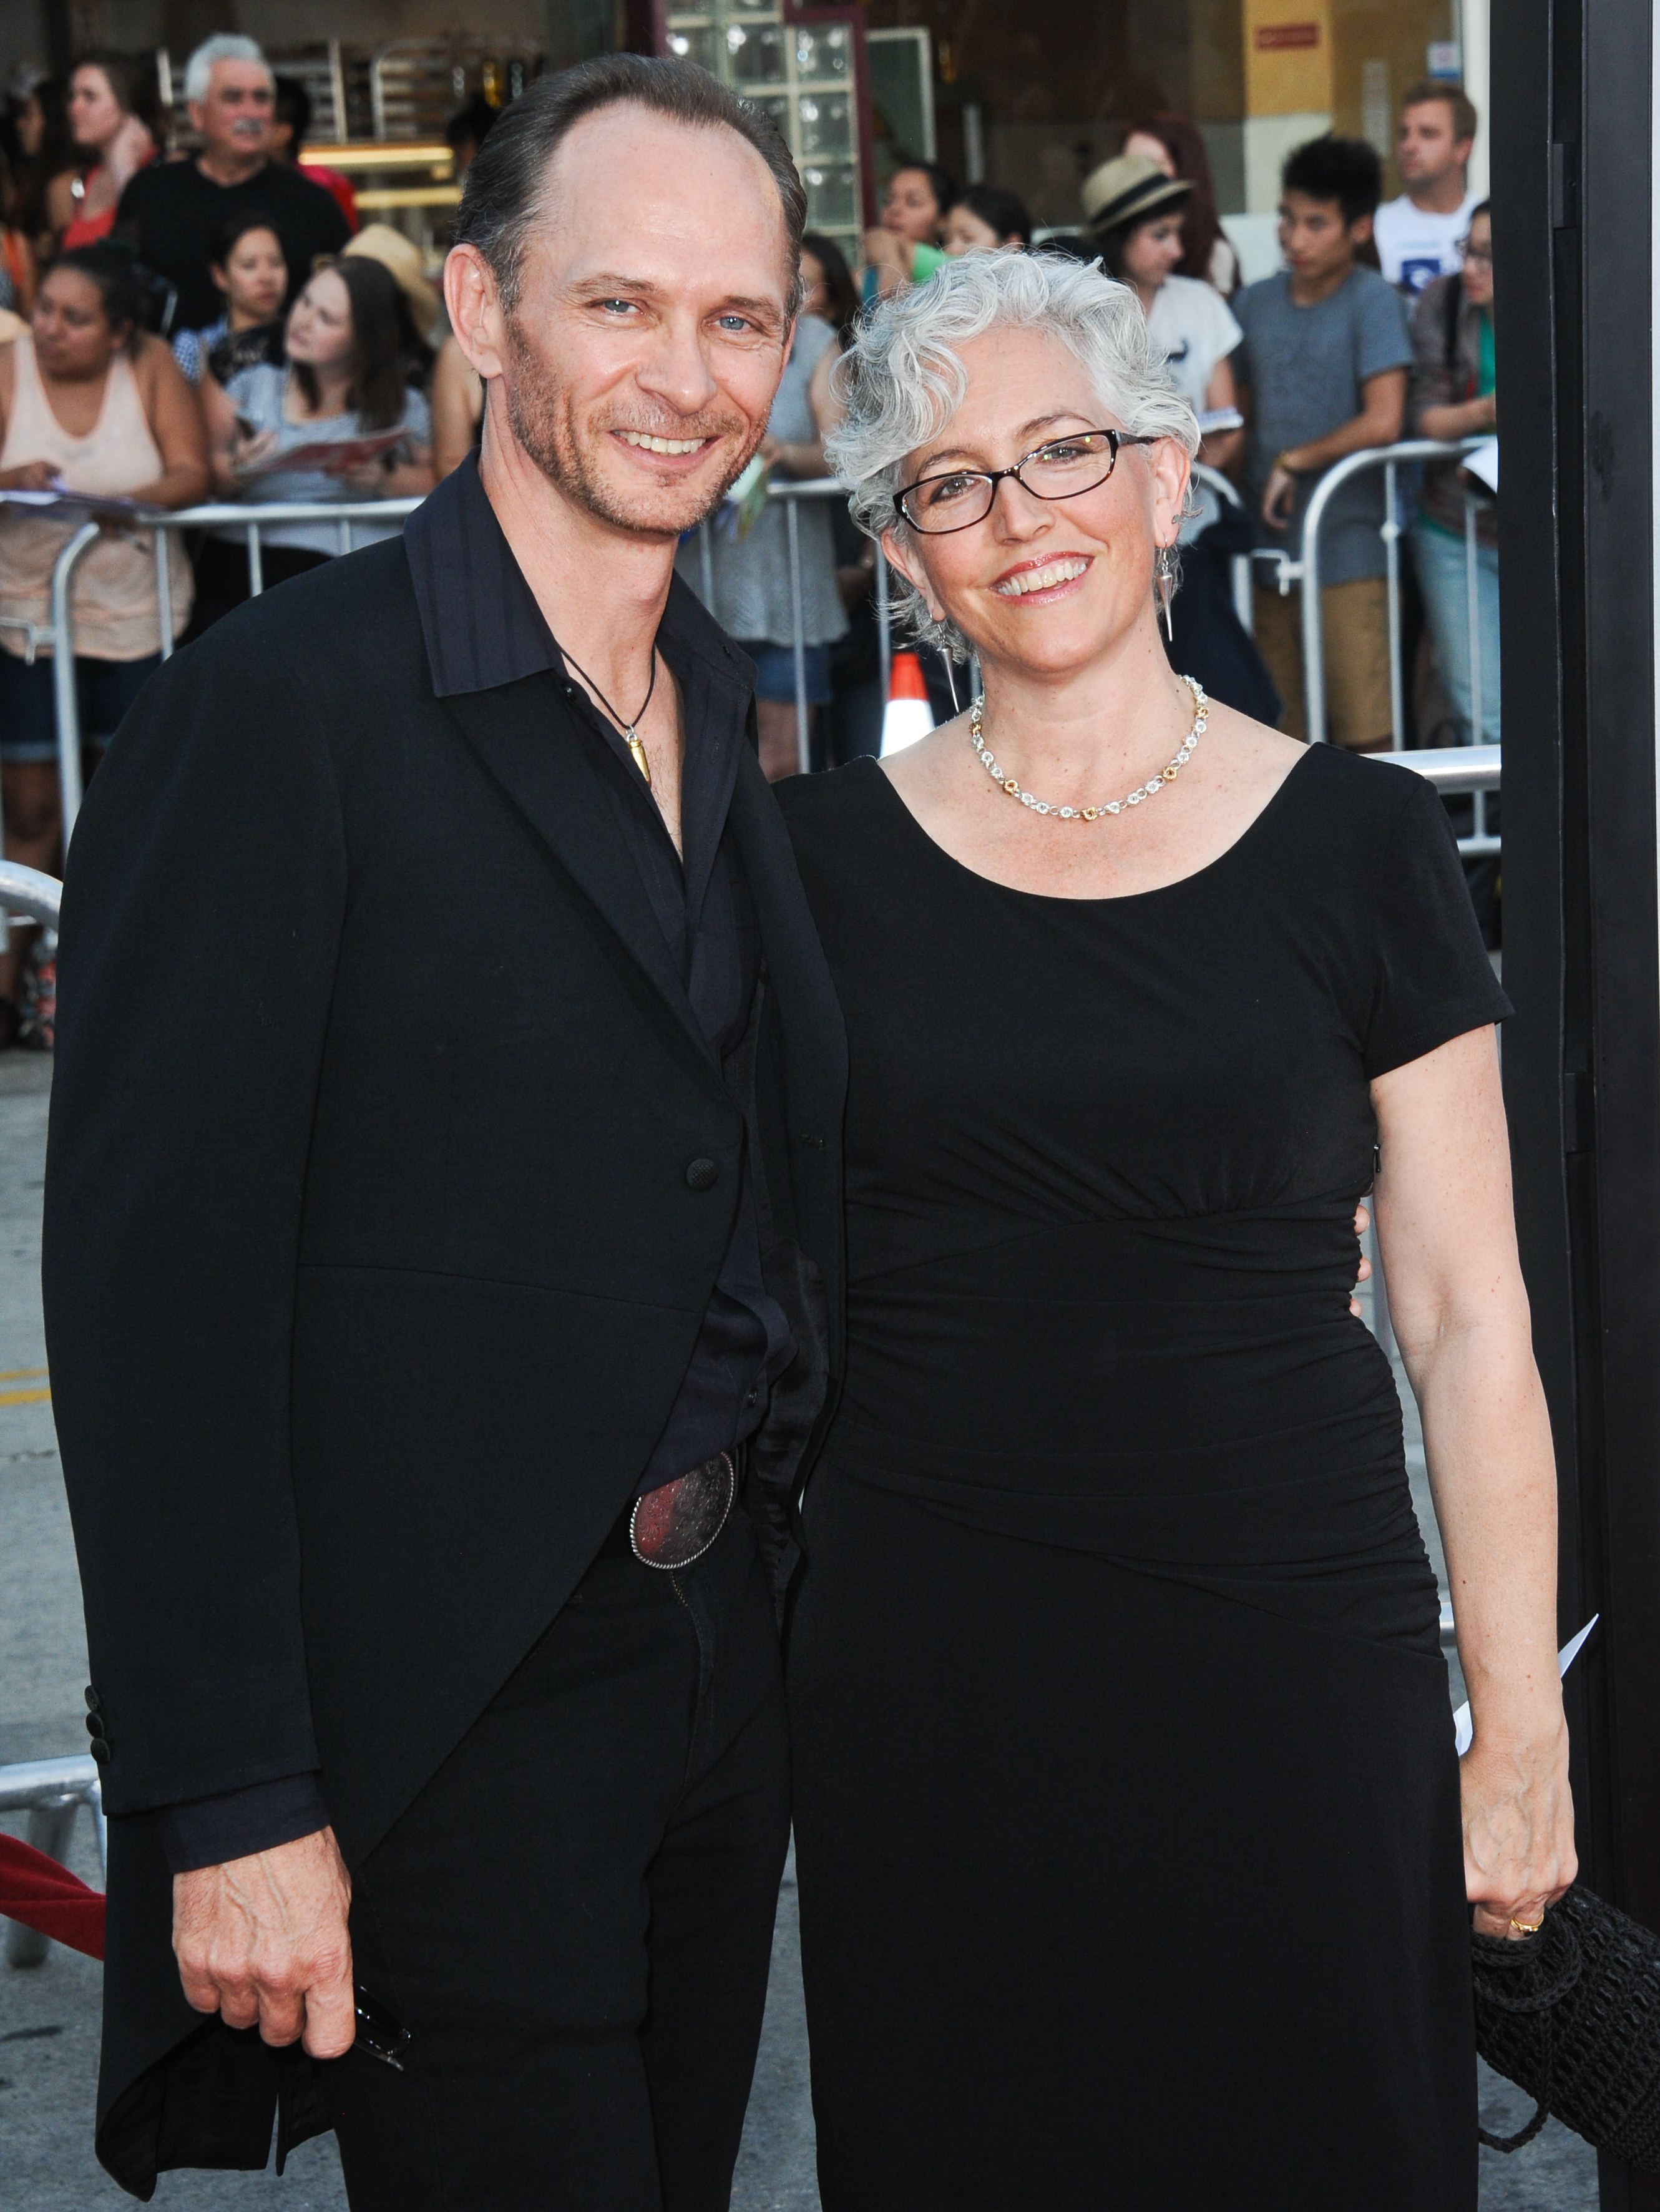 Brett Rickaby and wife Laurie LeBlanc (Rickaby) at Premiere of A Million Ways to Die in the West